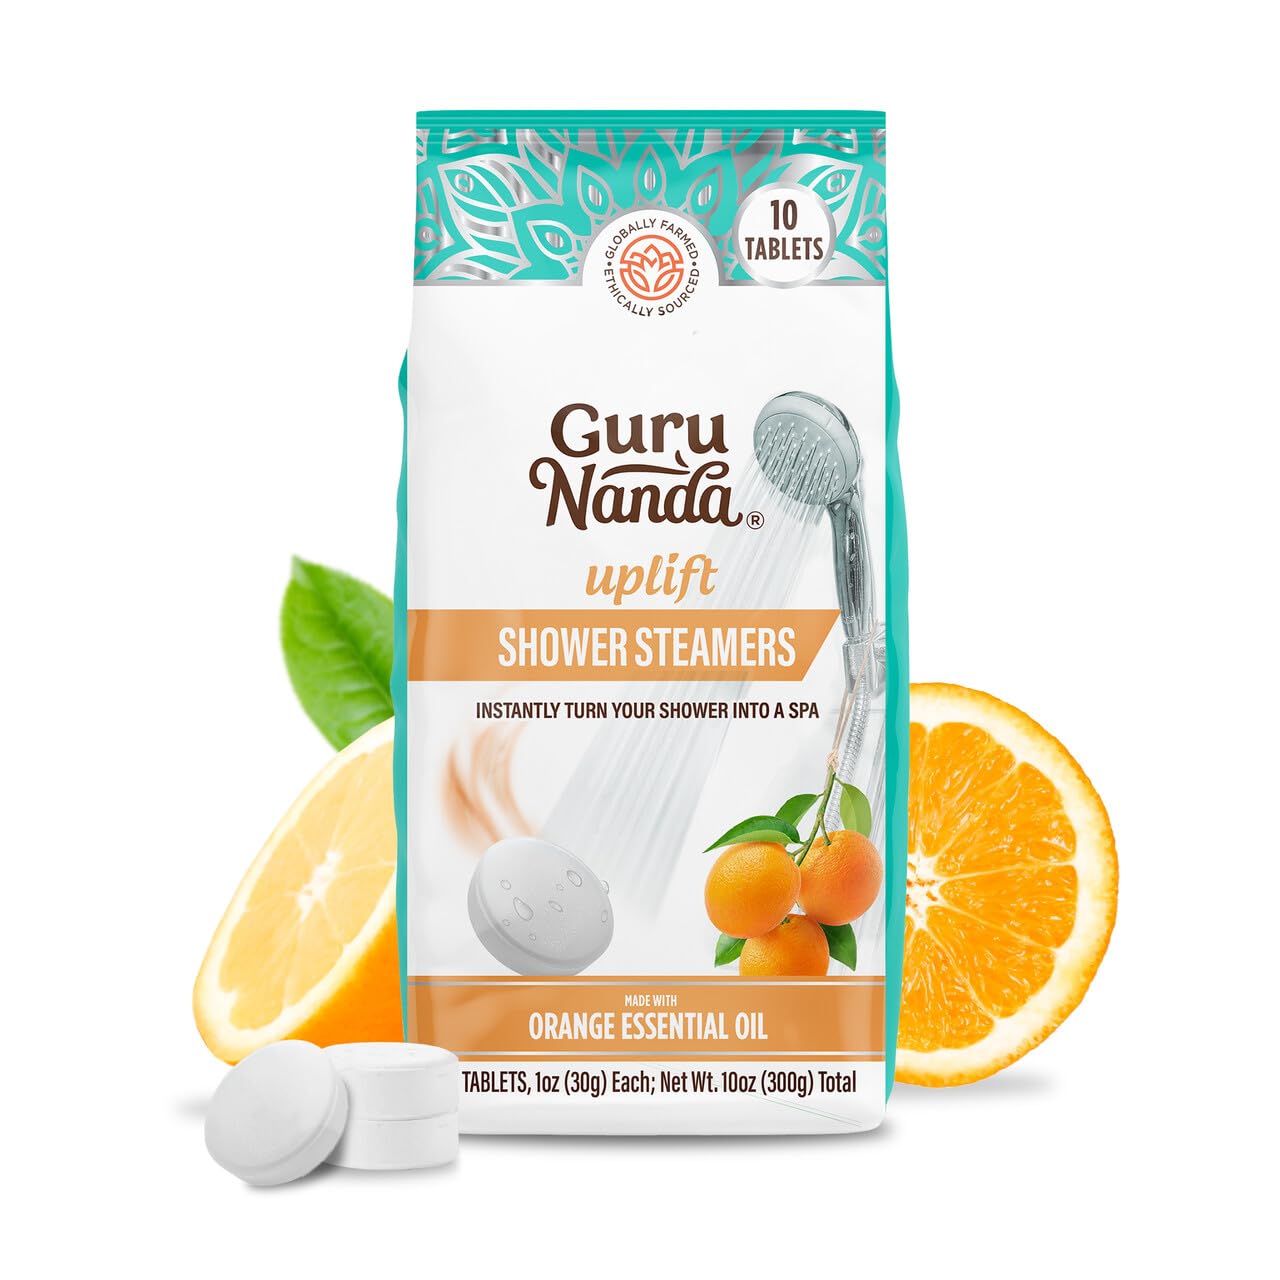 GuruNanda Uplift Shower Steamer Tablets (Pack of 10) - 100% Natural Orange Essential Oil Helps with Mood Enhancement & Relaxation and Eucalyptus aids in Congestion - Perfect for Home Spa & Self Care